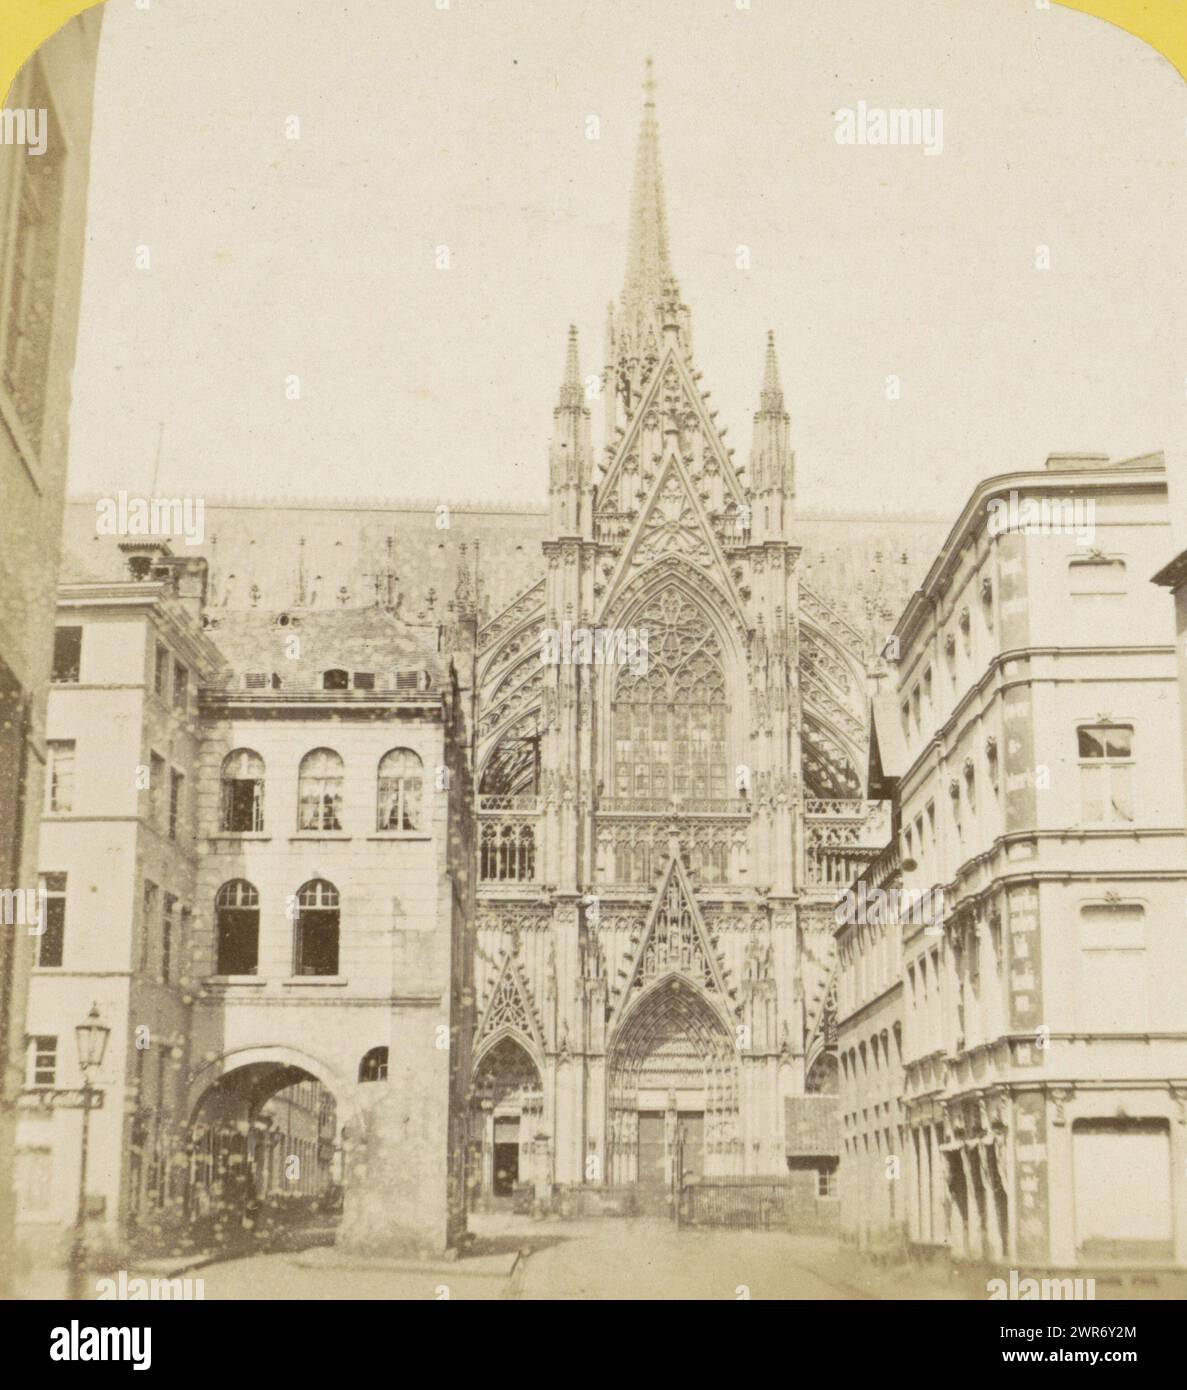 Southern facade of the Cologne Cathedral, Germany, Façade méridionale de la Cathédrale (title on object), Cologne (Prusse) (series title on object), Allemagne (series title on object), Hippolyte Jouvin, Cologne, 1864, cardboard, albumen print, height 87 mm × width 177 mm, stereograph Stock Photo